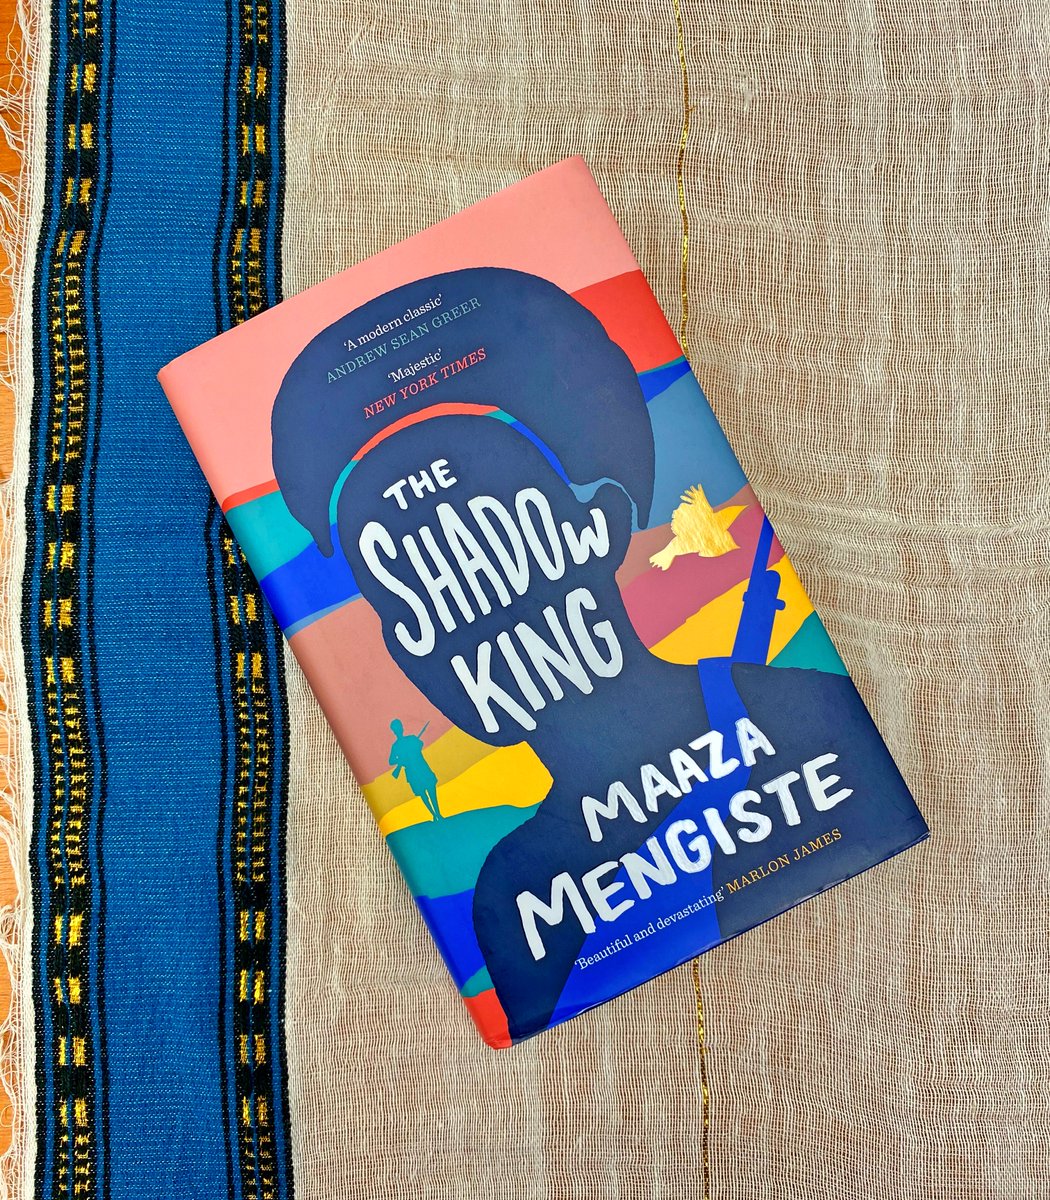 Join us in congratulating @MaazaMengiste, whose acclaimed second novel, #TheShadowKing, has made the #LongList for the #2020BookerPrize!🎉

Set in 1935 during Italy’s invasion of #Ethiopia, the novel explores female strength and what it means to be a woman at war.

#FinestFiction